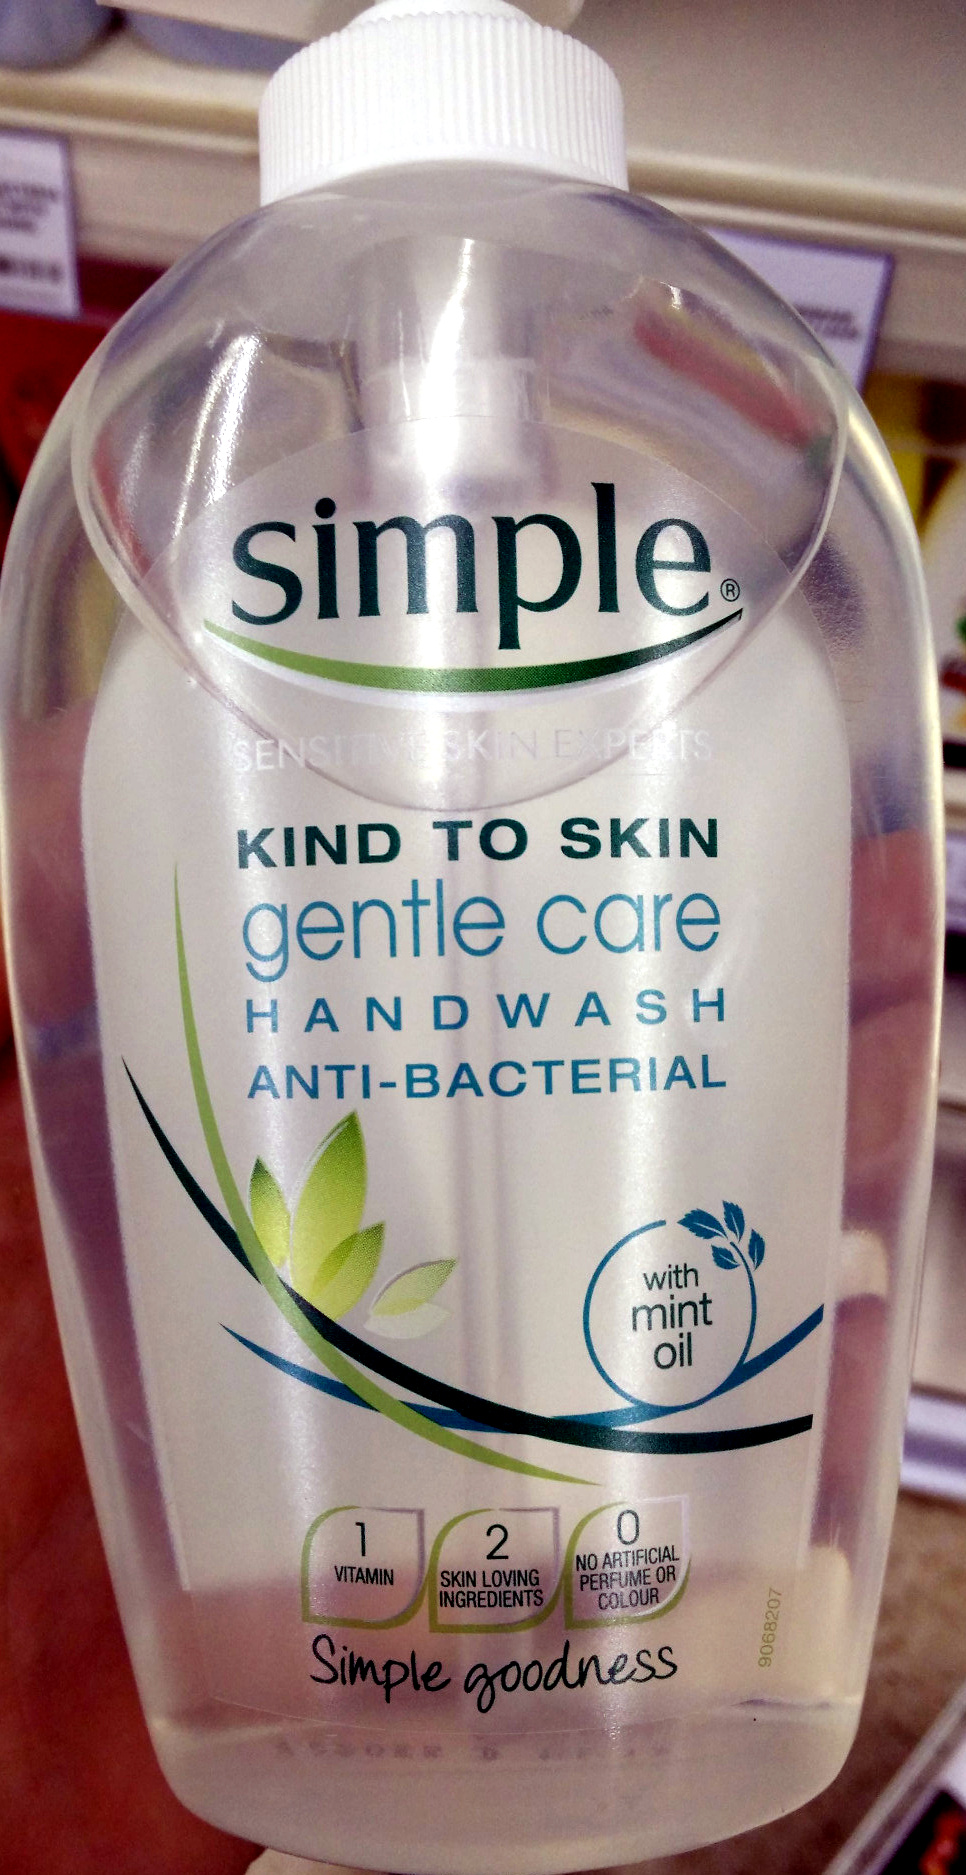 Kind ton skin gentle care handwash anti-bacterial with mint oil - Product - en